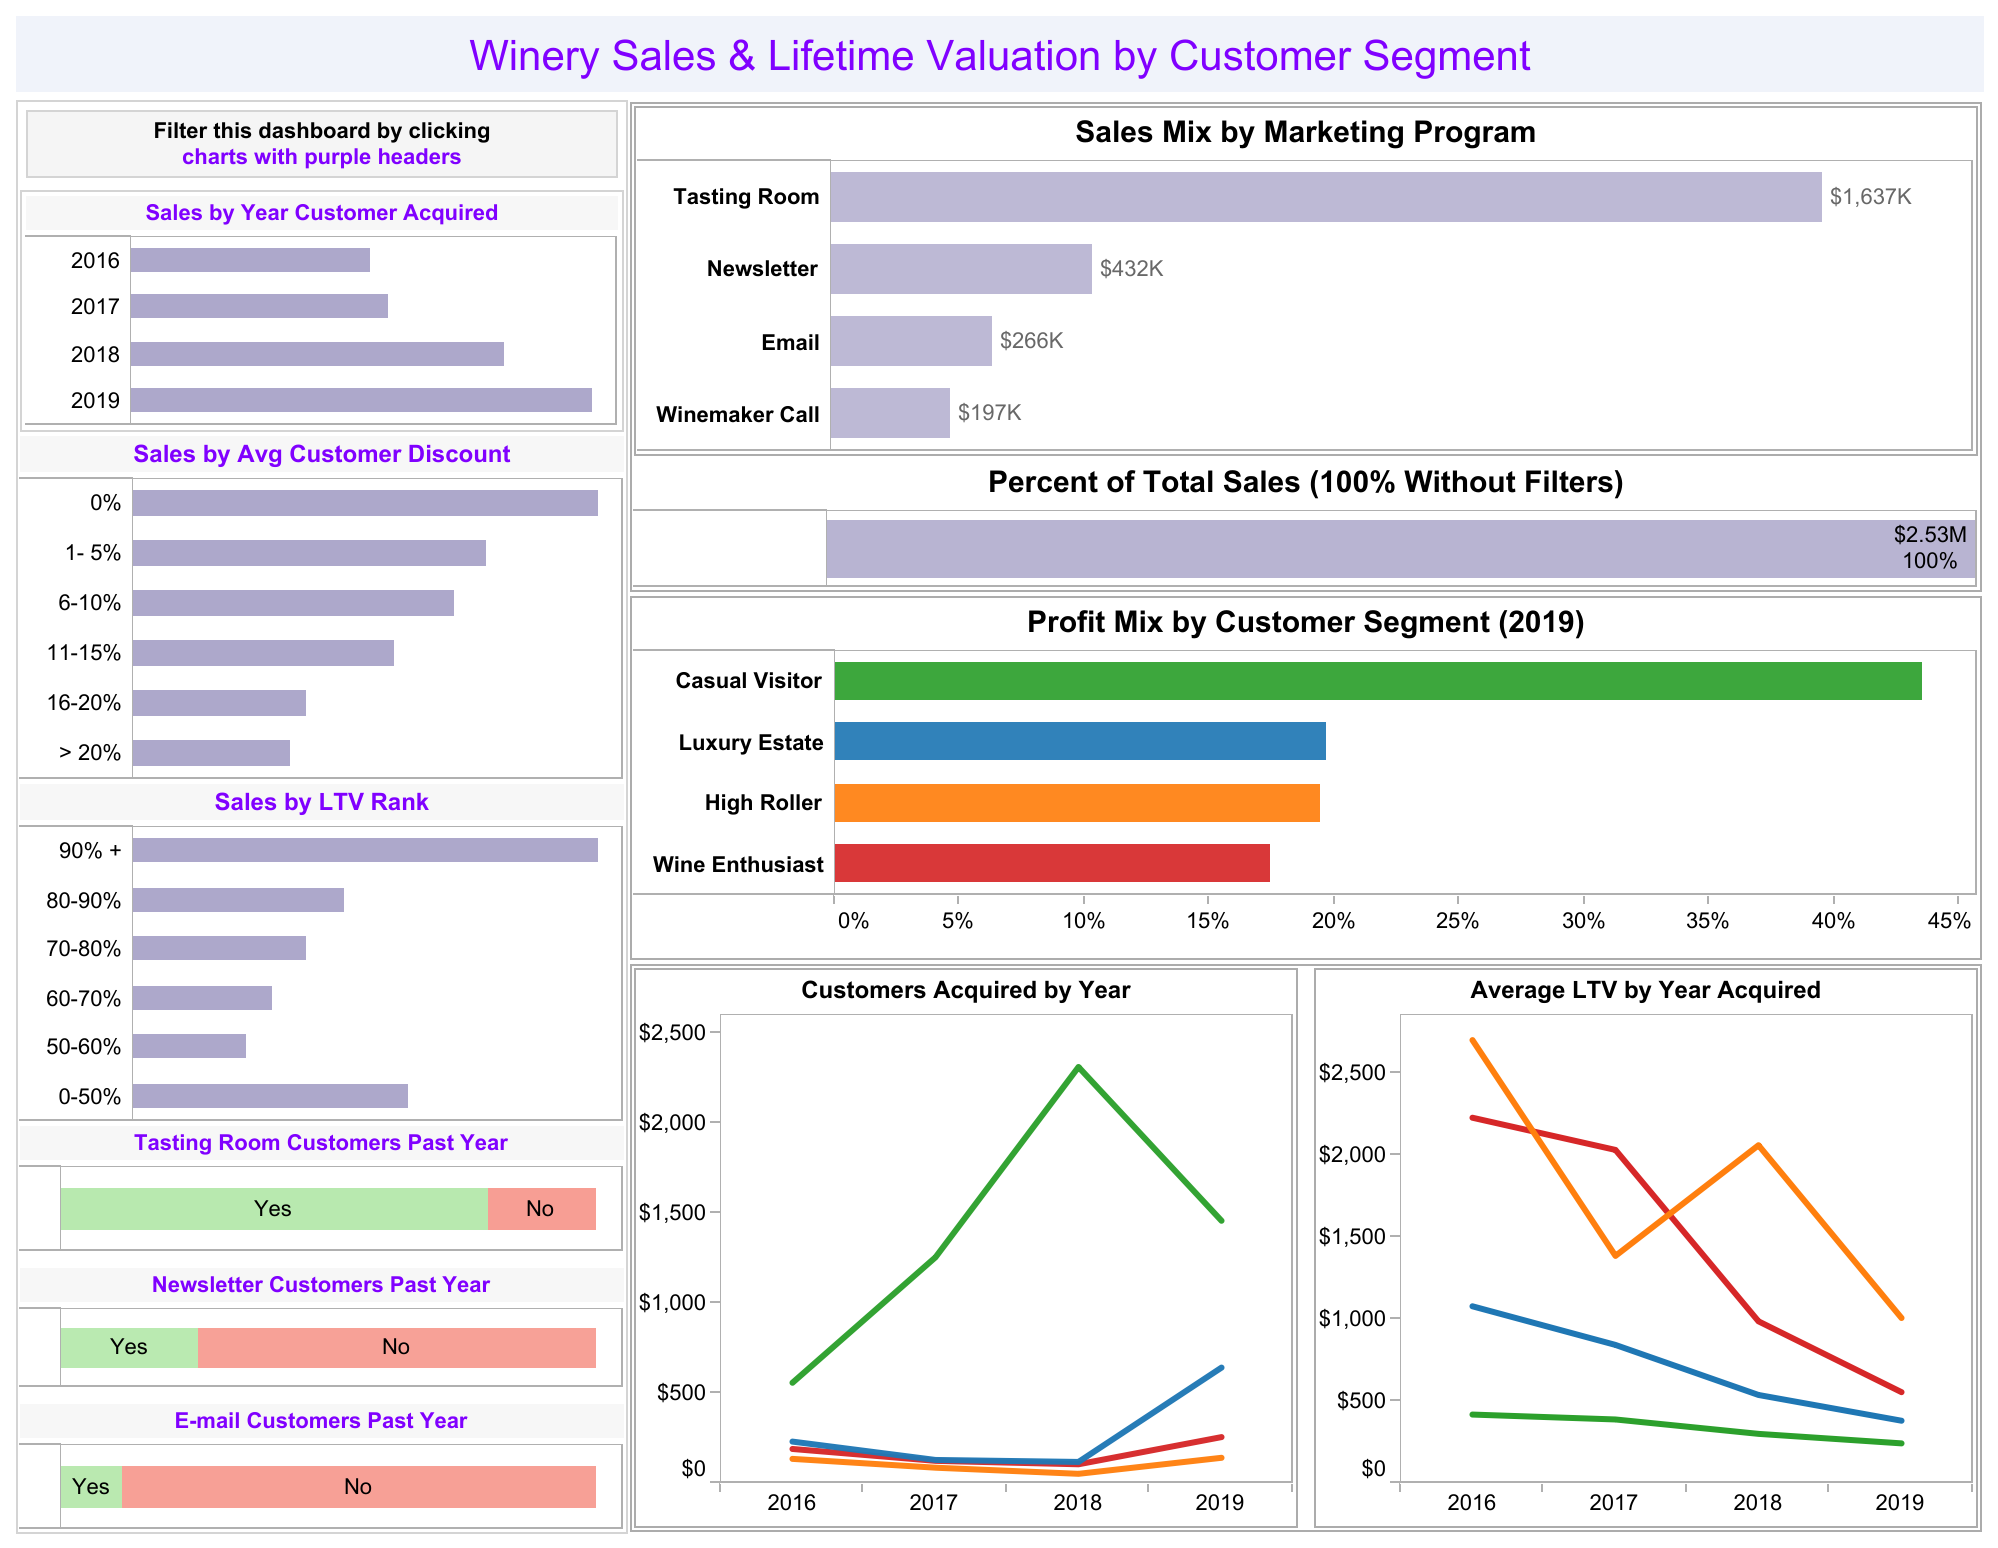 Stephen McDaniel White Paper - A marketing dashboard to review customers and programs at a boutique winery